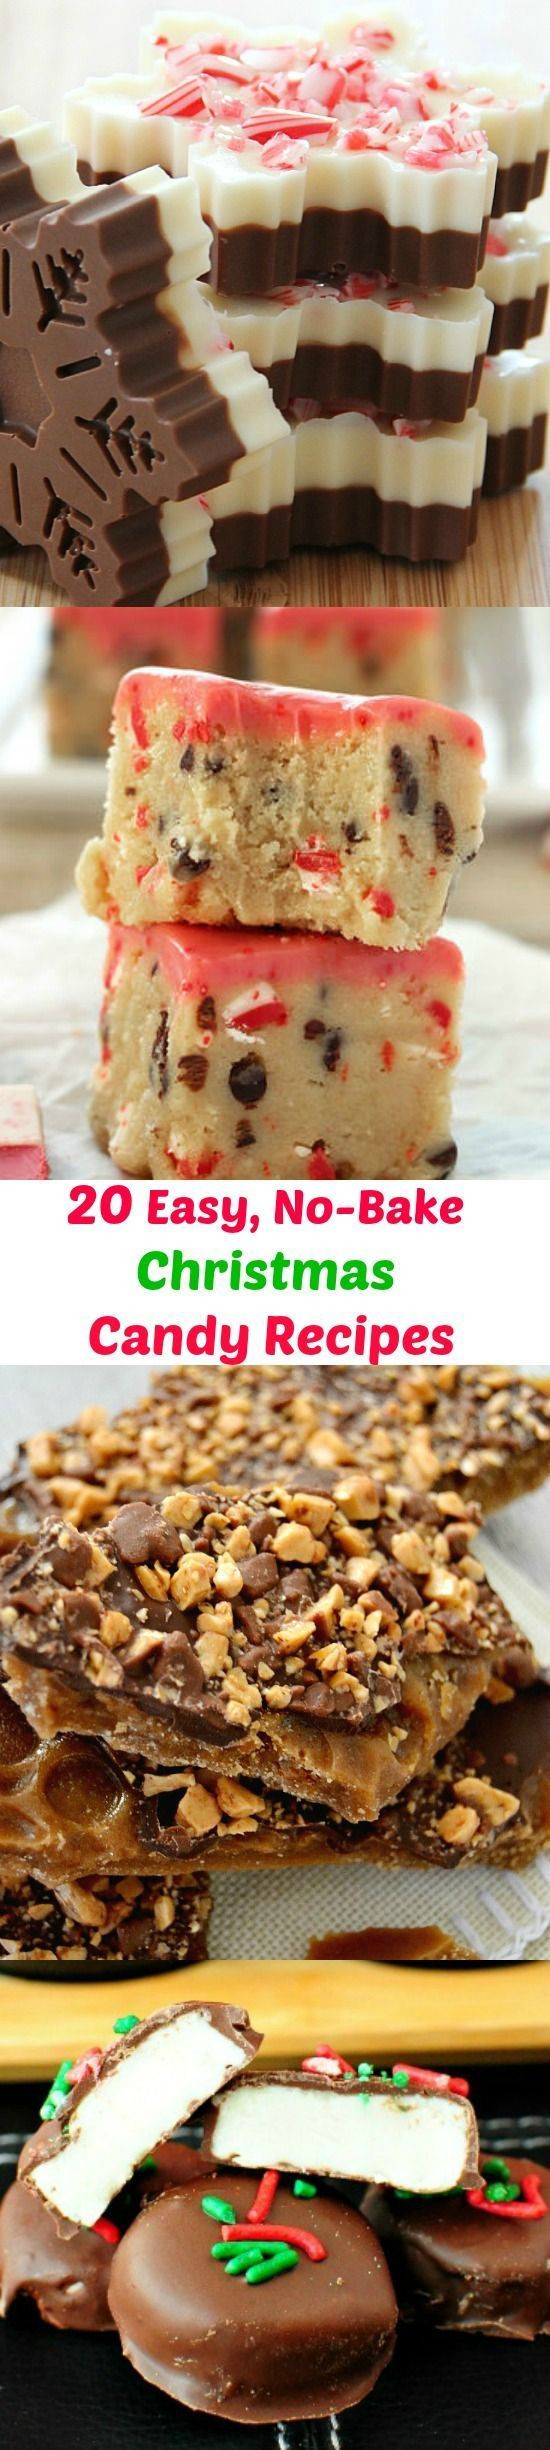 Quick And Easy Christmas Candy Recipes
 Best 25 Christmas recipes ideas on Pinterest